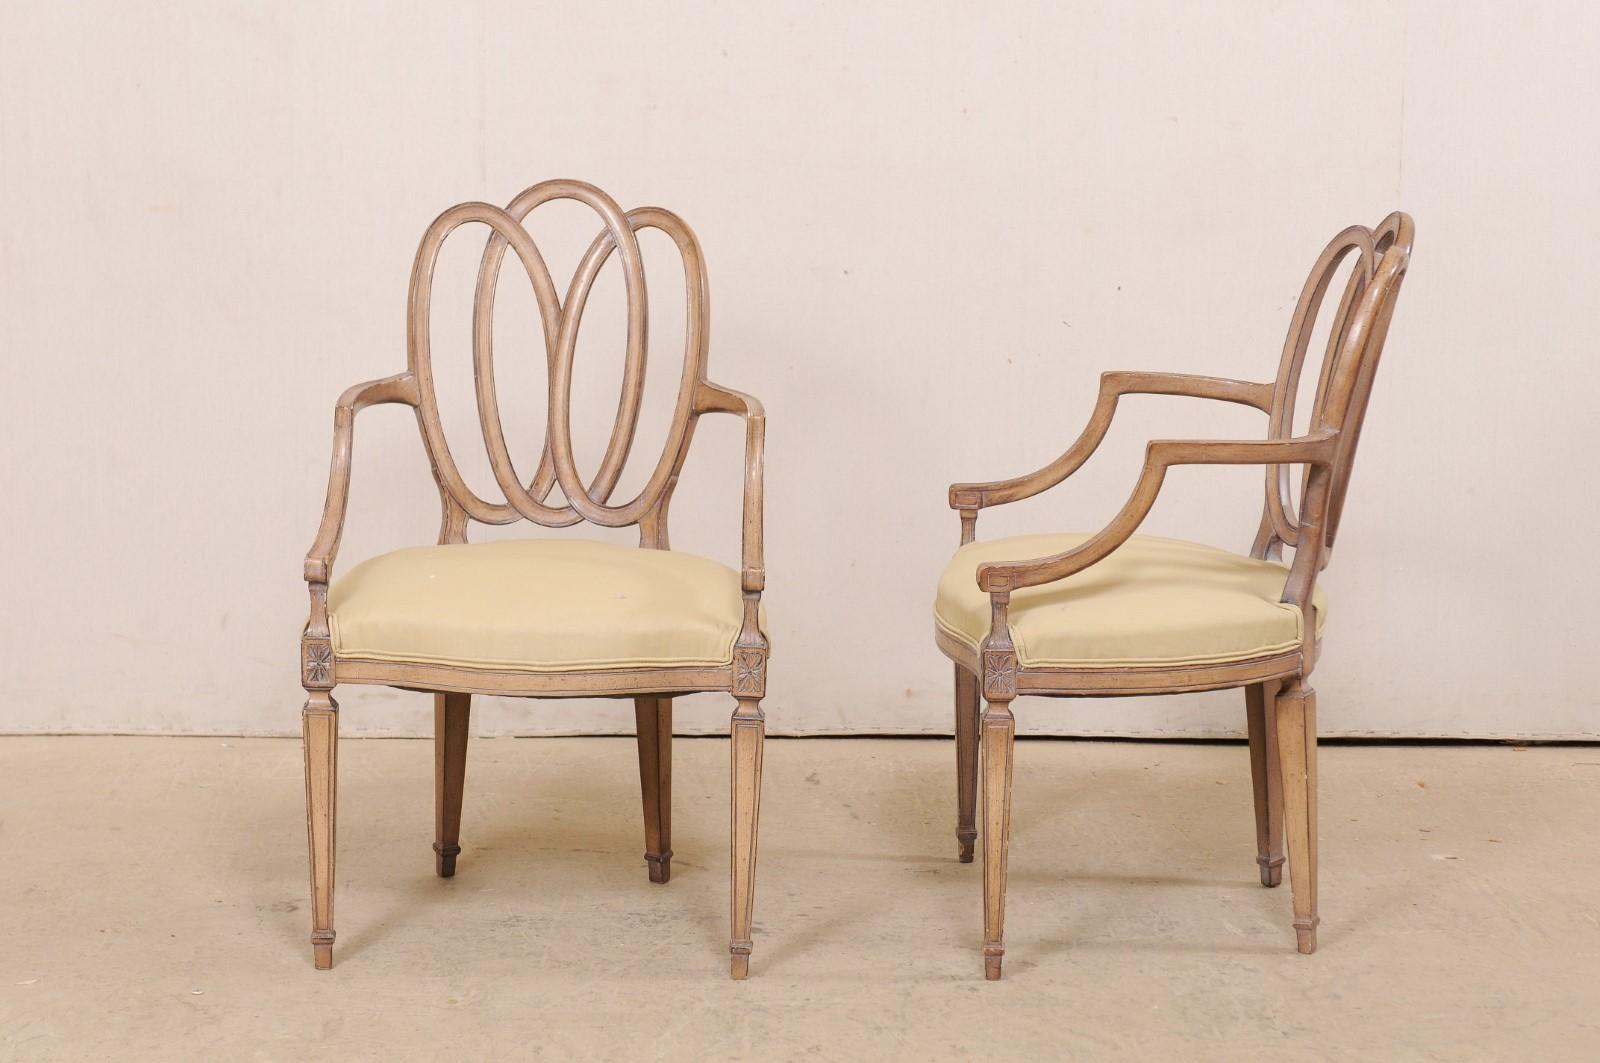 Italian Pair of Carved-Wood Armchairs with Upholstered Seats, Mid-20th Century For Sale 5